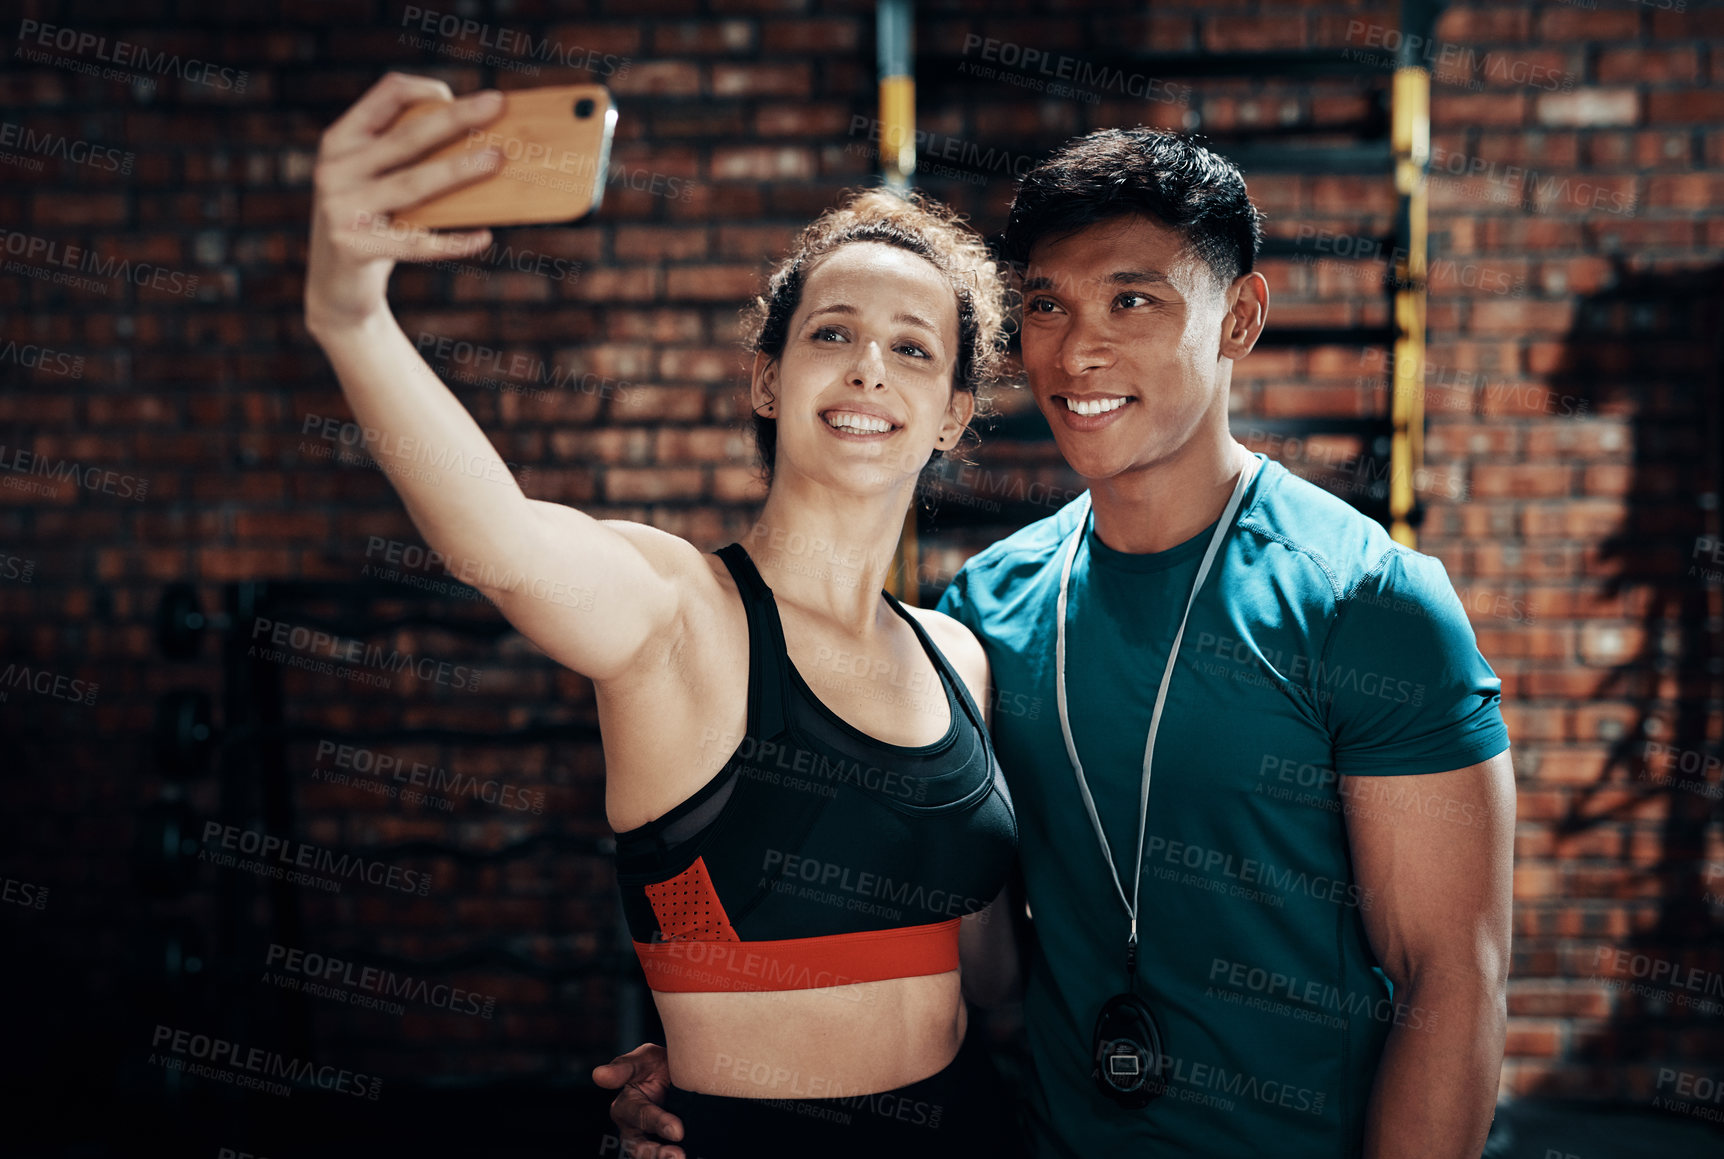 Buy stock photo Cropped shot of two young sportspeople taking a selfie together in a gym